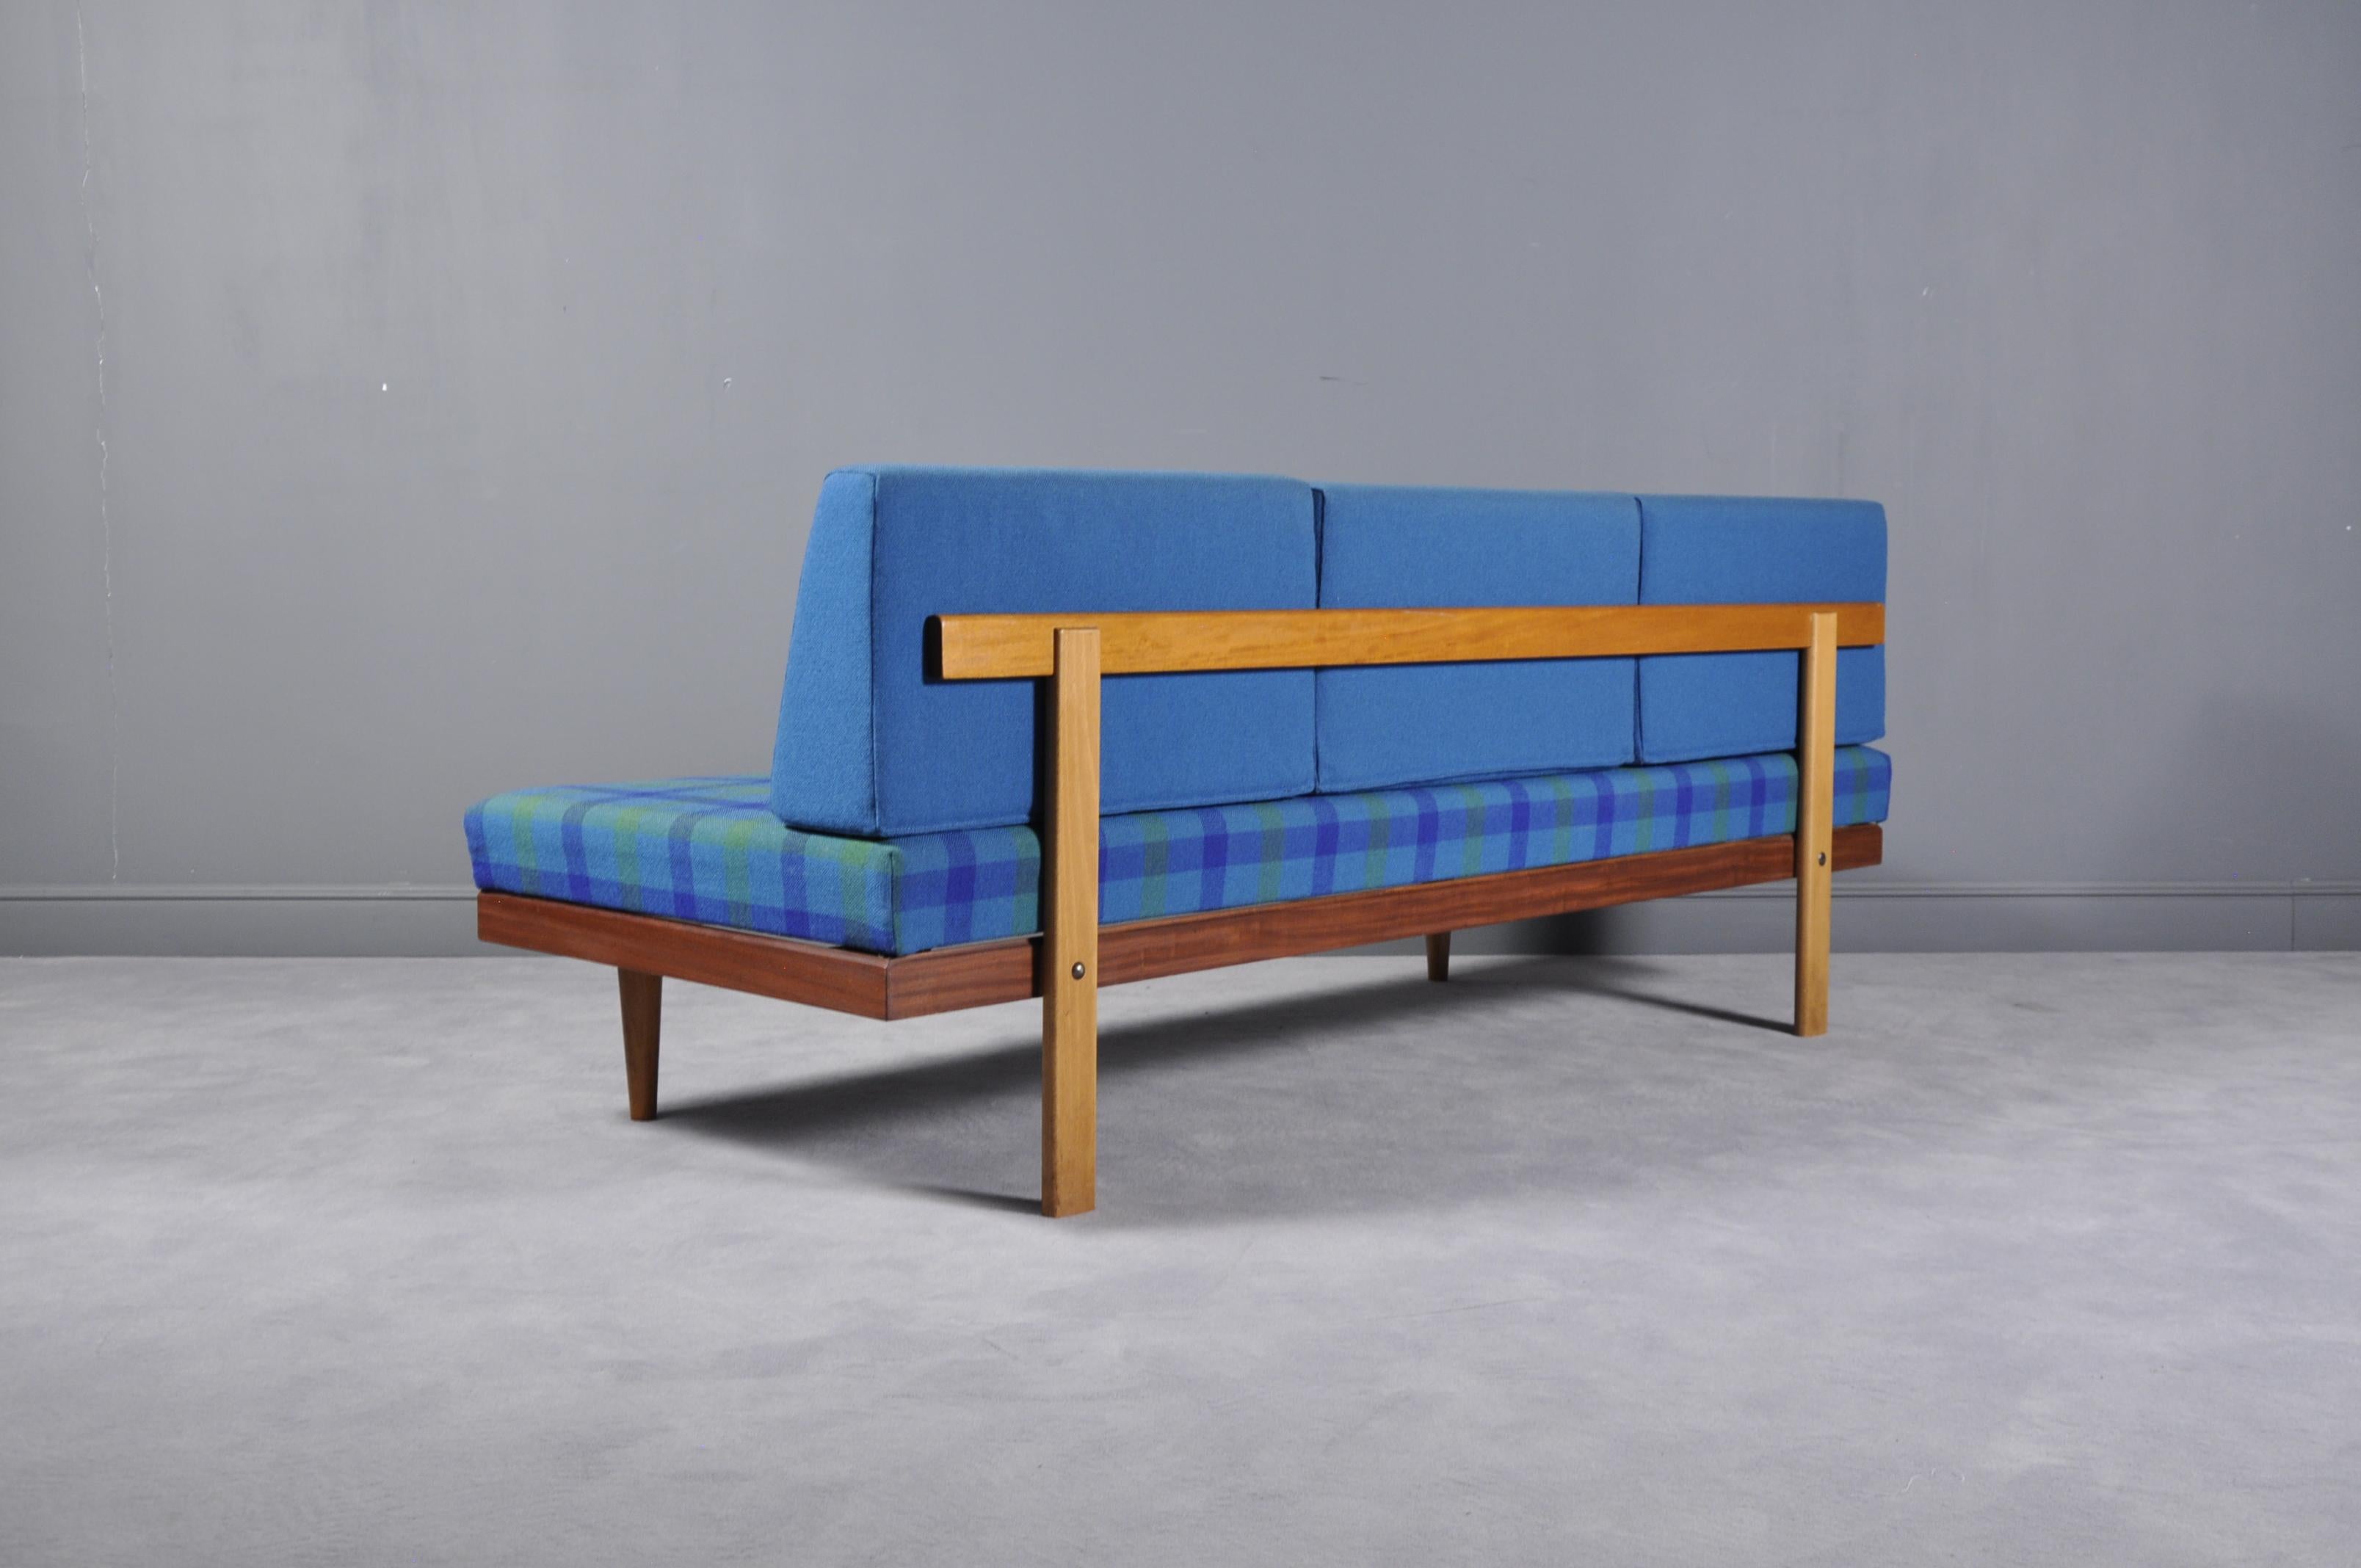 This 1960s 'Svane' daybed was designed by Haldor Vik and Ingmar Relling for Ekornes, Norway. Ingmar Relling was an impassioned designer, who created a series of functional furniture designs throughout his long career. Simplicity, minimalism,